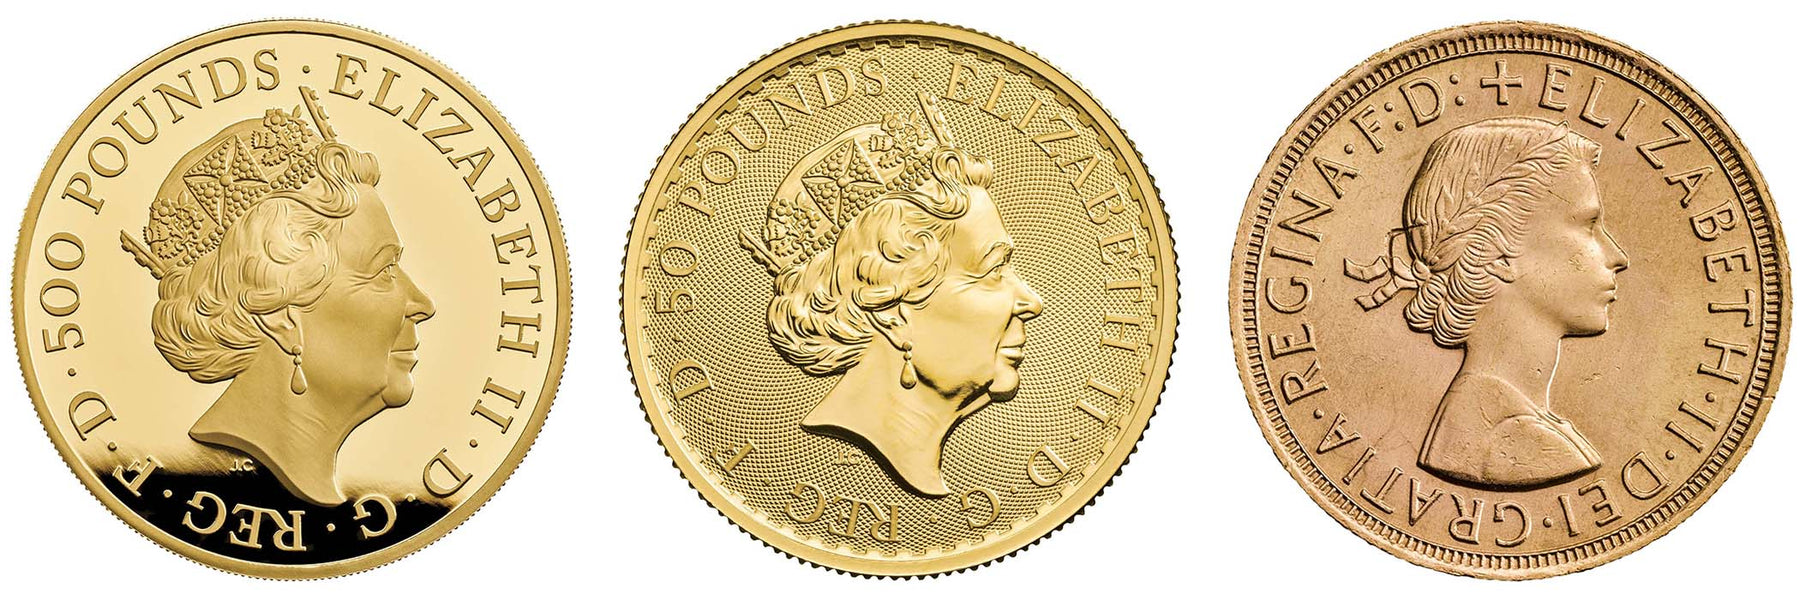 Proof vs Brilliant Uncirculated vs Circulation - A Guide to Coin Manufacturing Standards